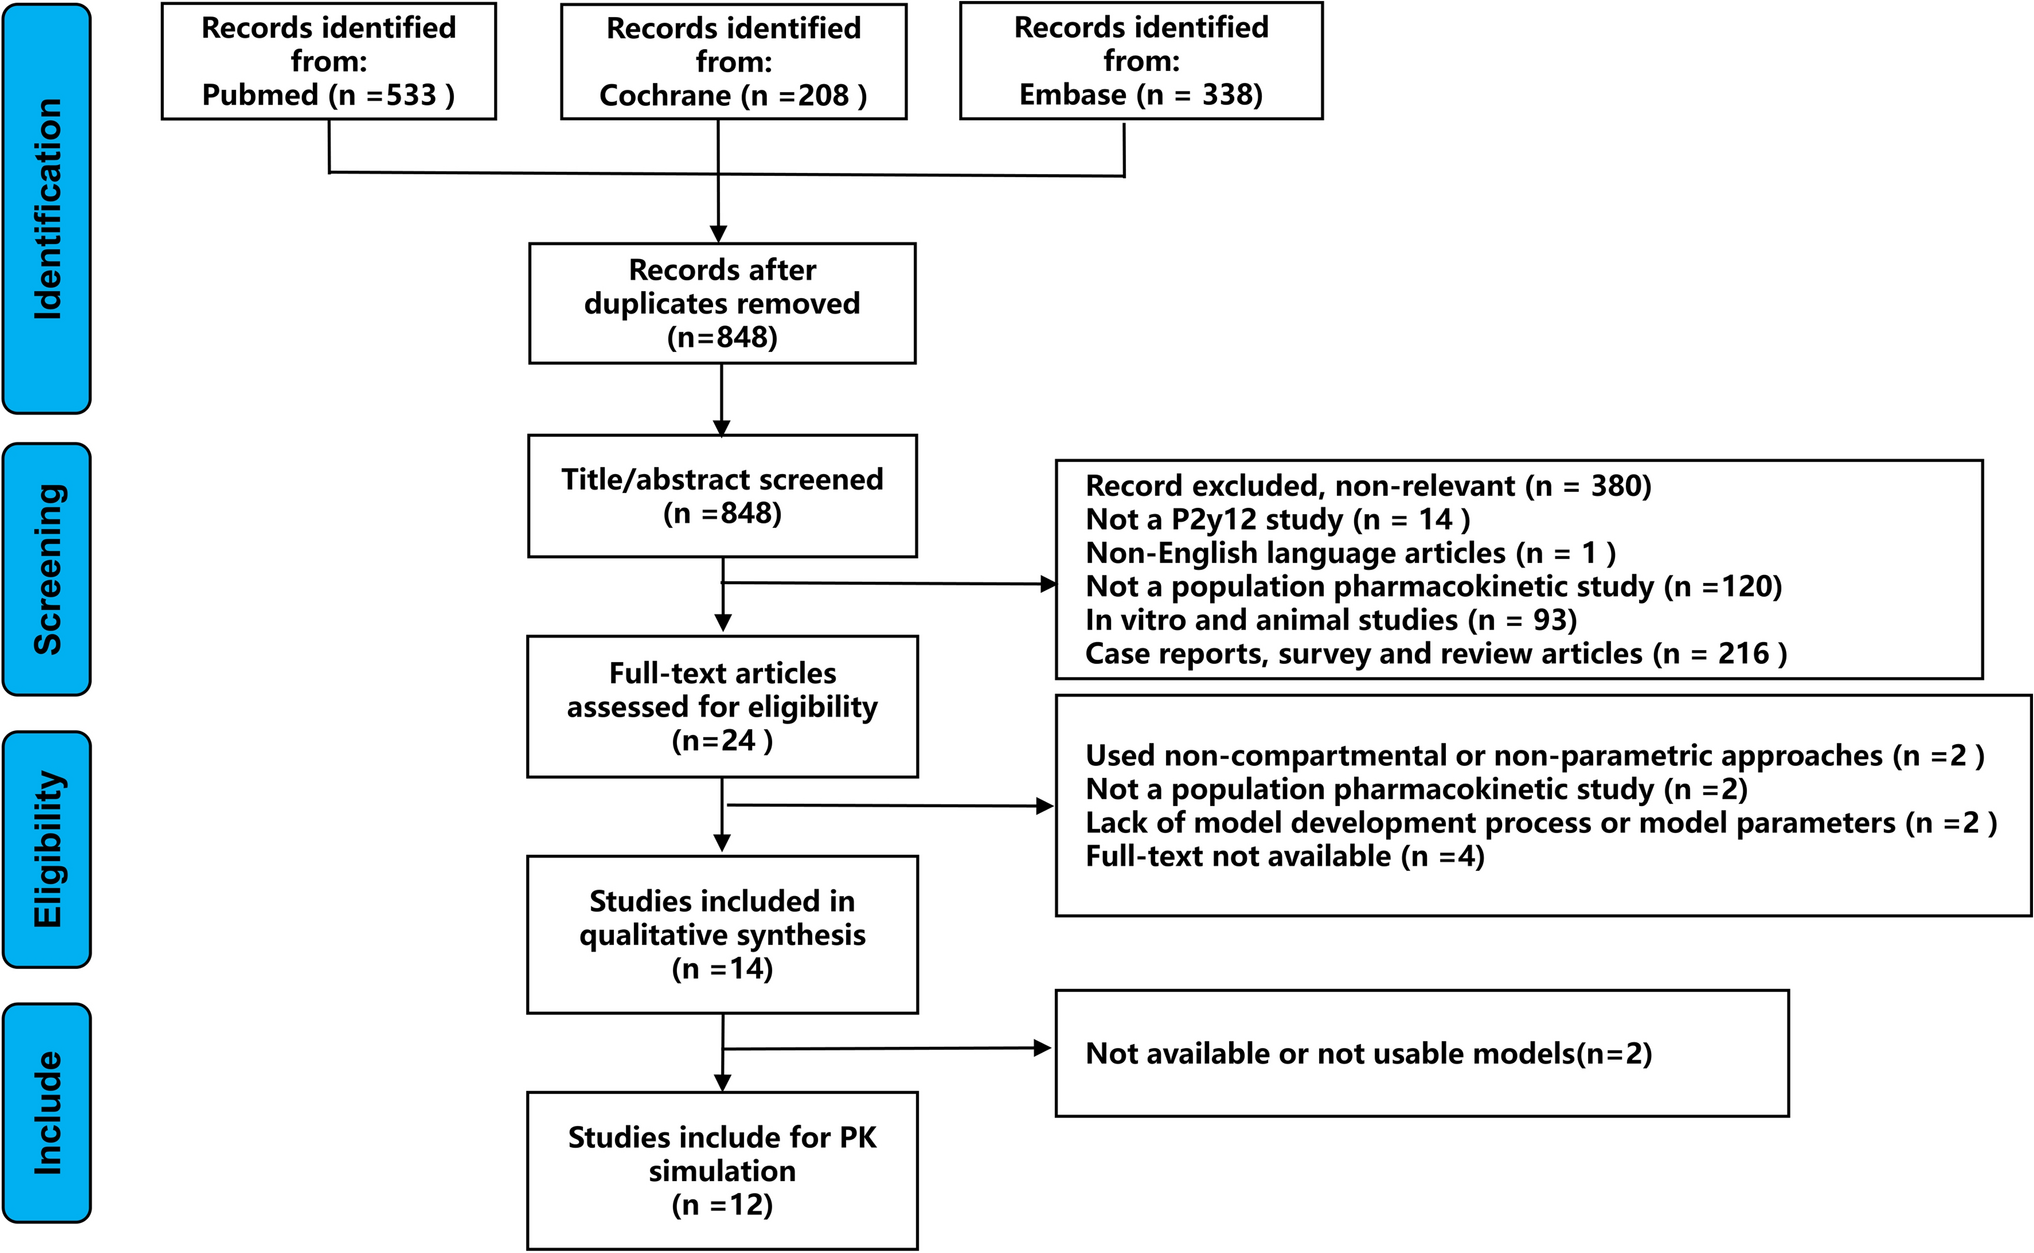 Population Pharmacokinetic/Pharmacodynamic Models for P2Y12 Inhibitors: A Systematic Review and Clinical Appraisal Using Exposure Simulation